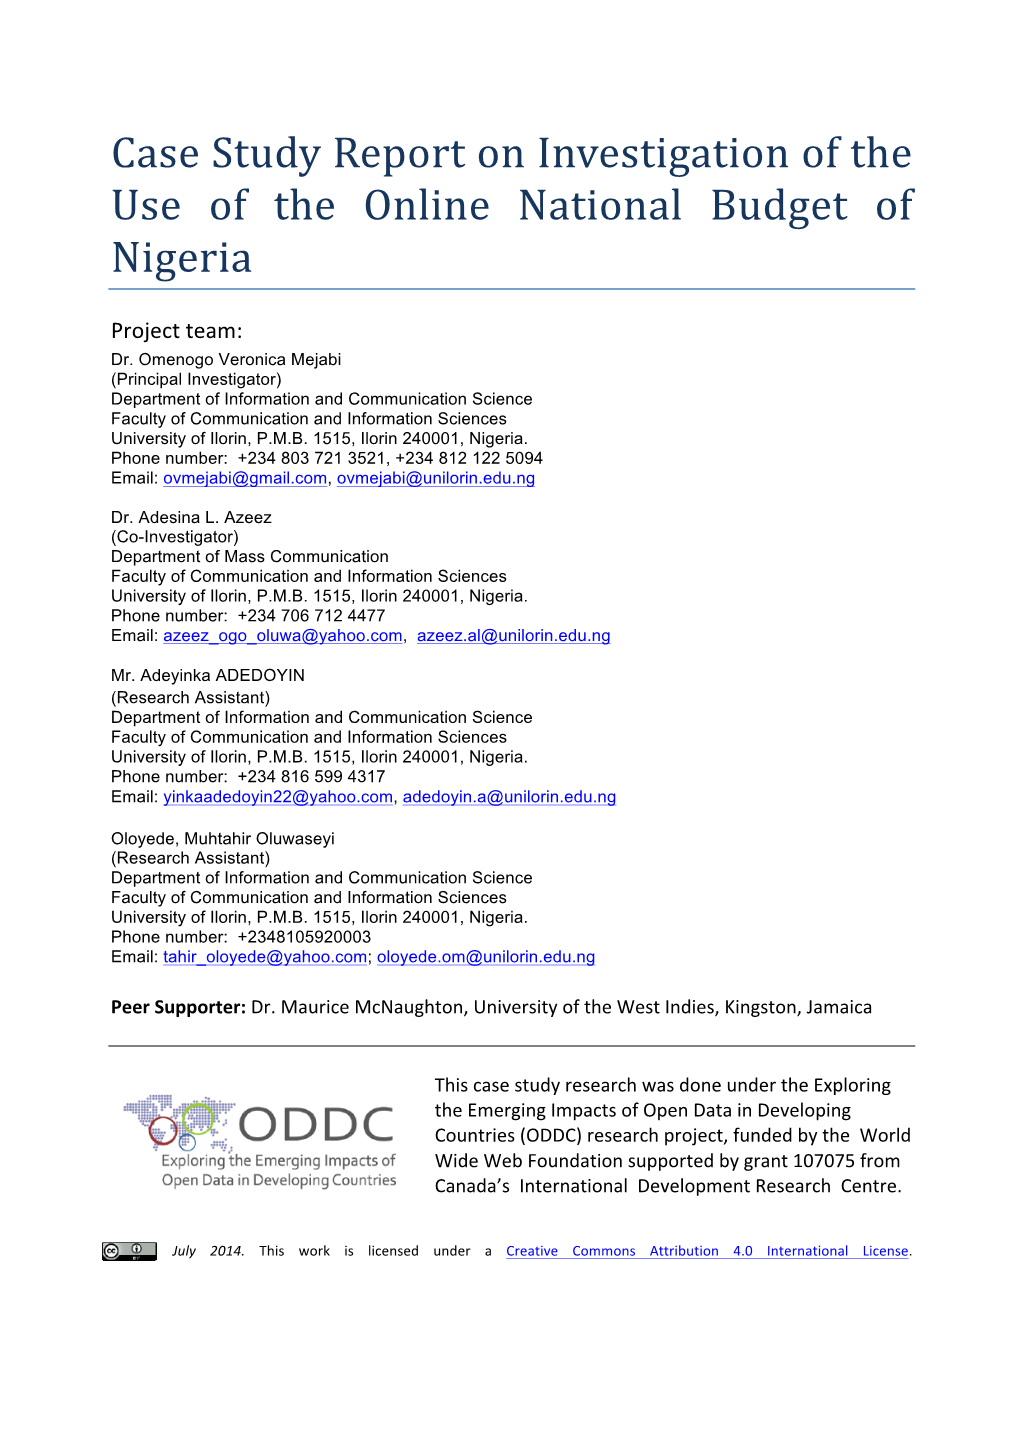 Investigated the Use of the Online National Budget of Nigeria